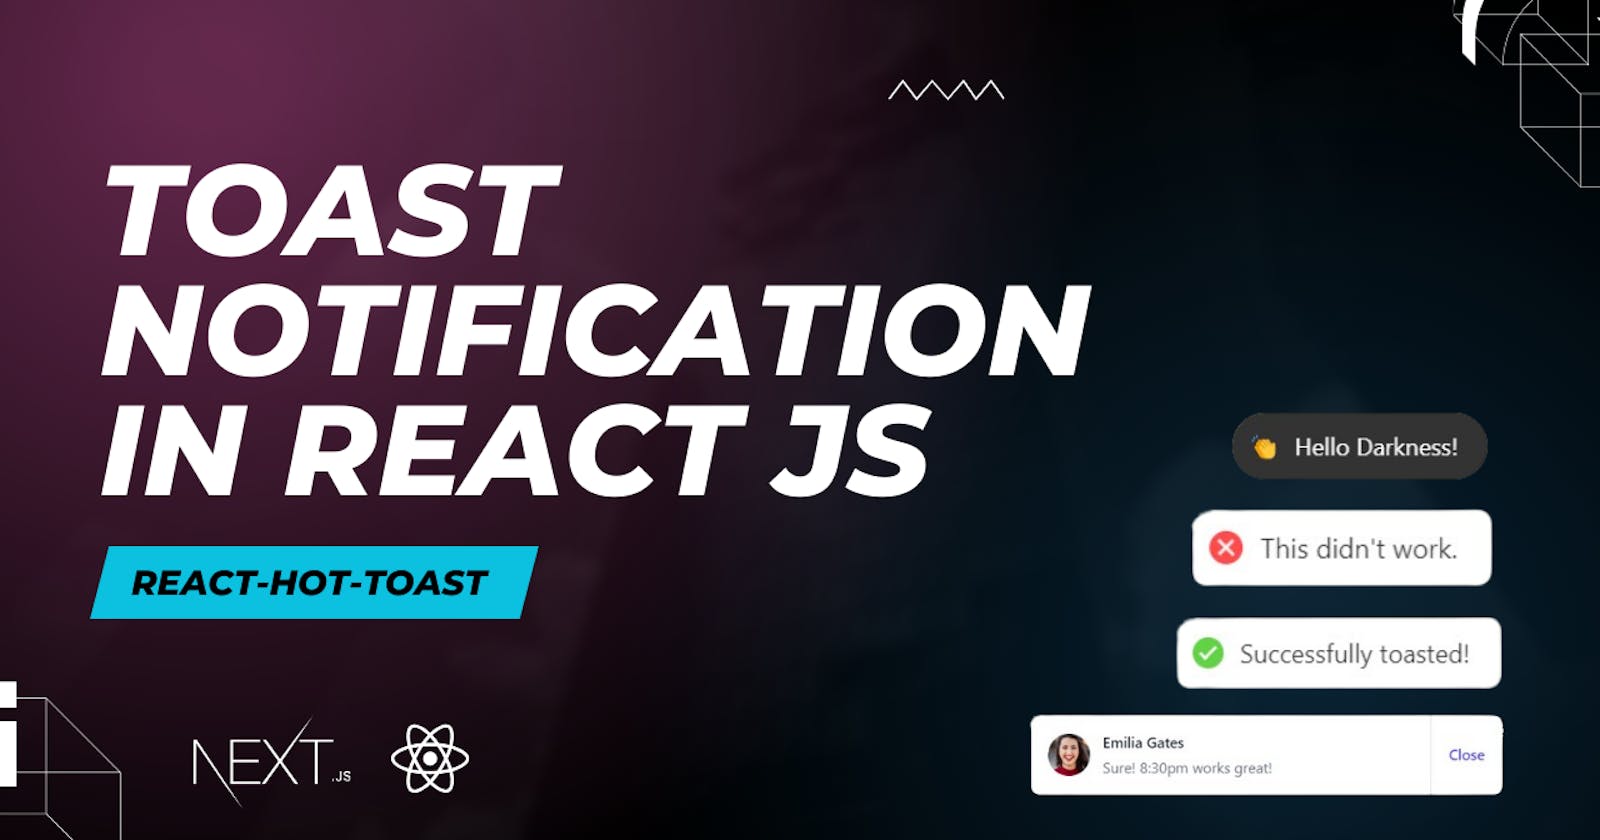 Toast Notifications in React.js with react-hot-toast